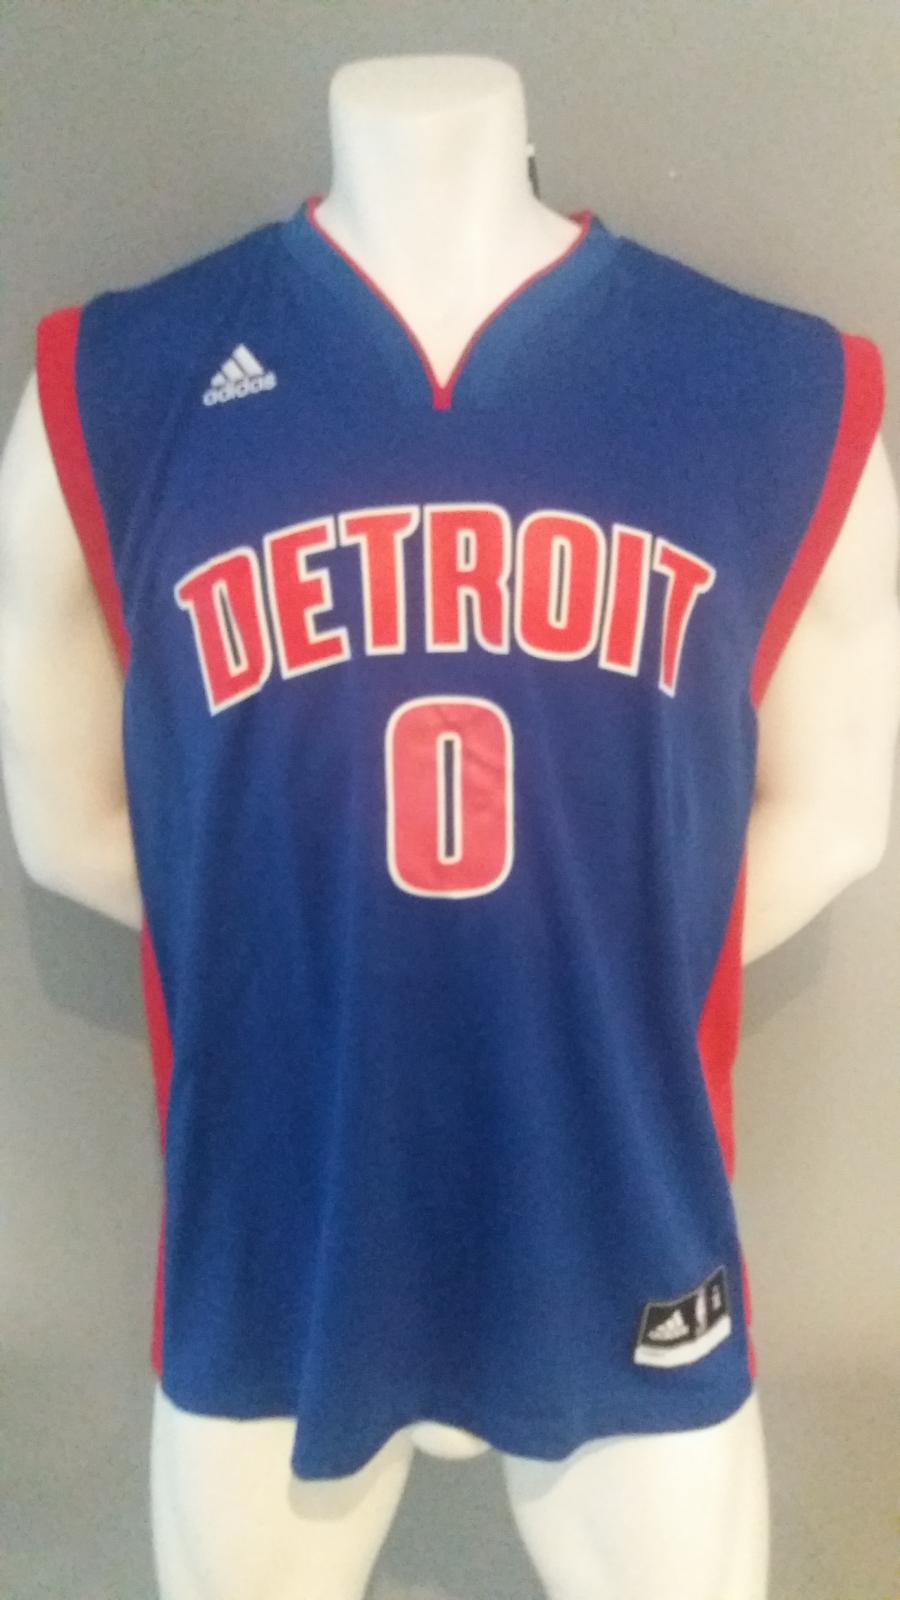 Jersey - Replica - Hombre - Andre Drummond - Detroit Pistons - Road - Adidas